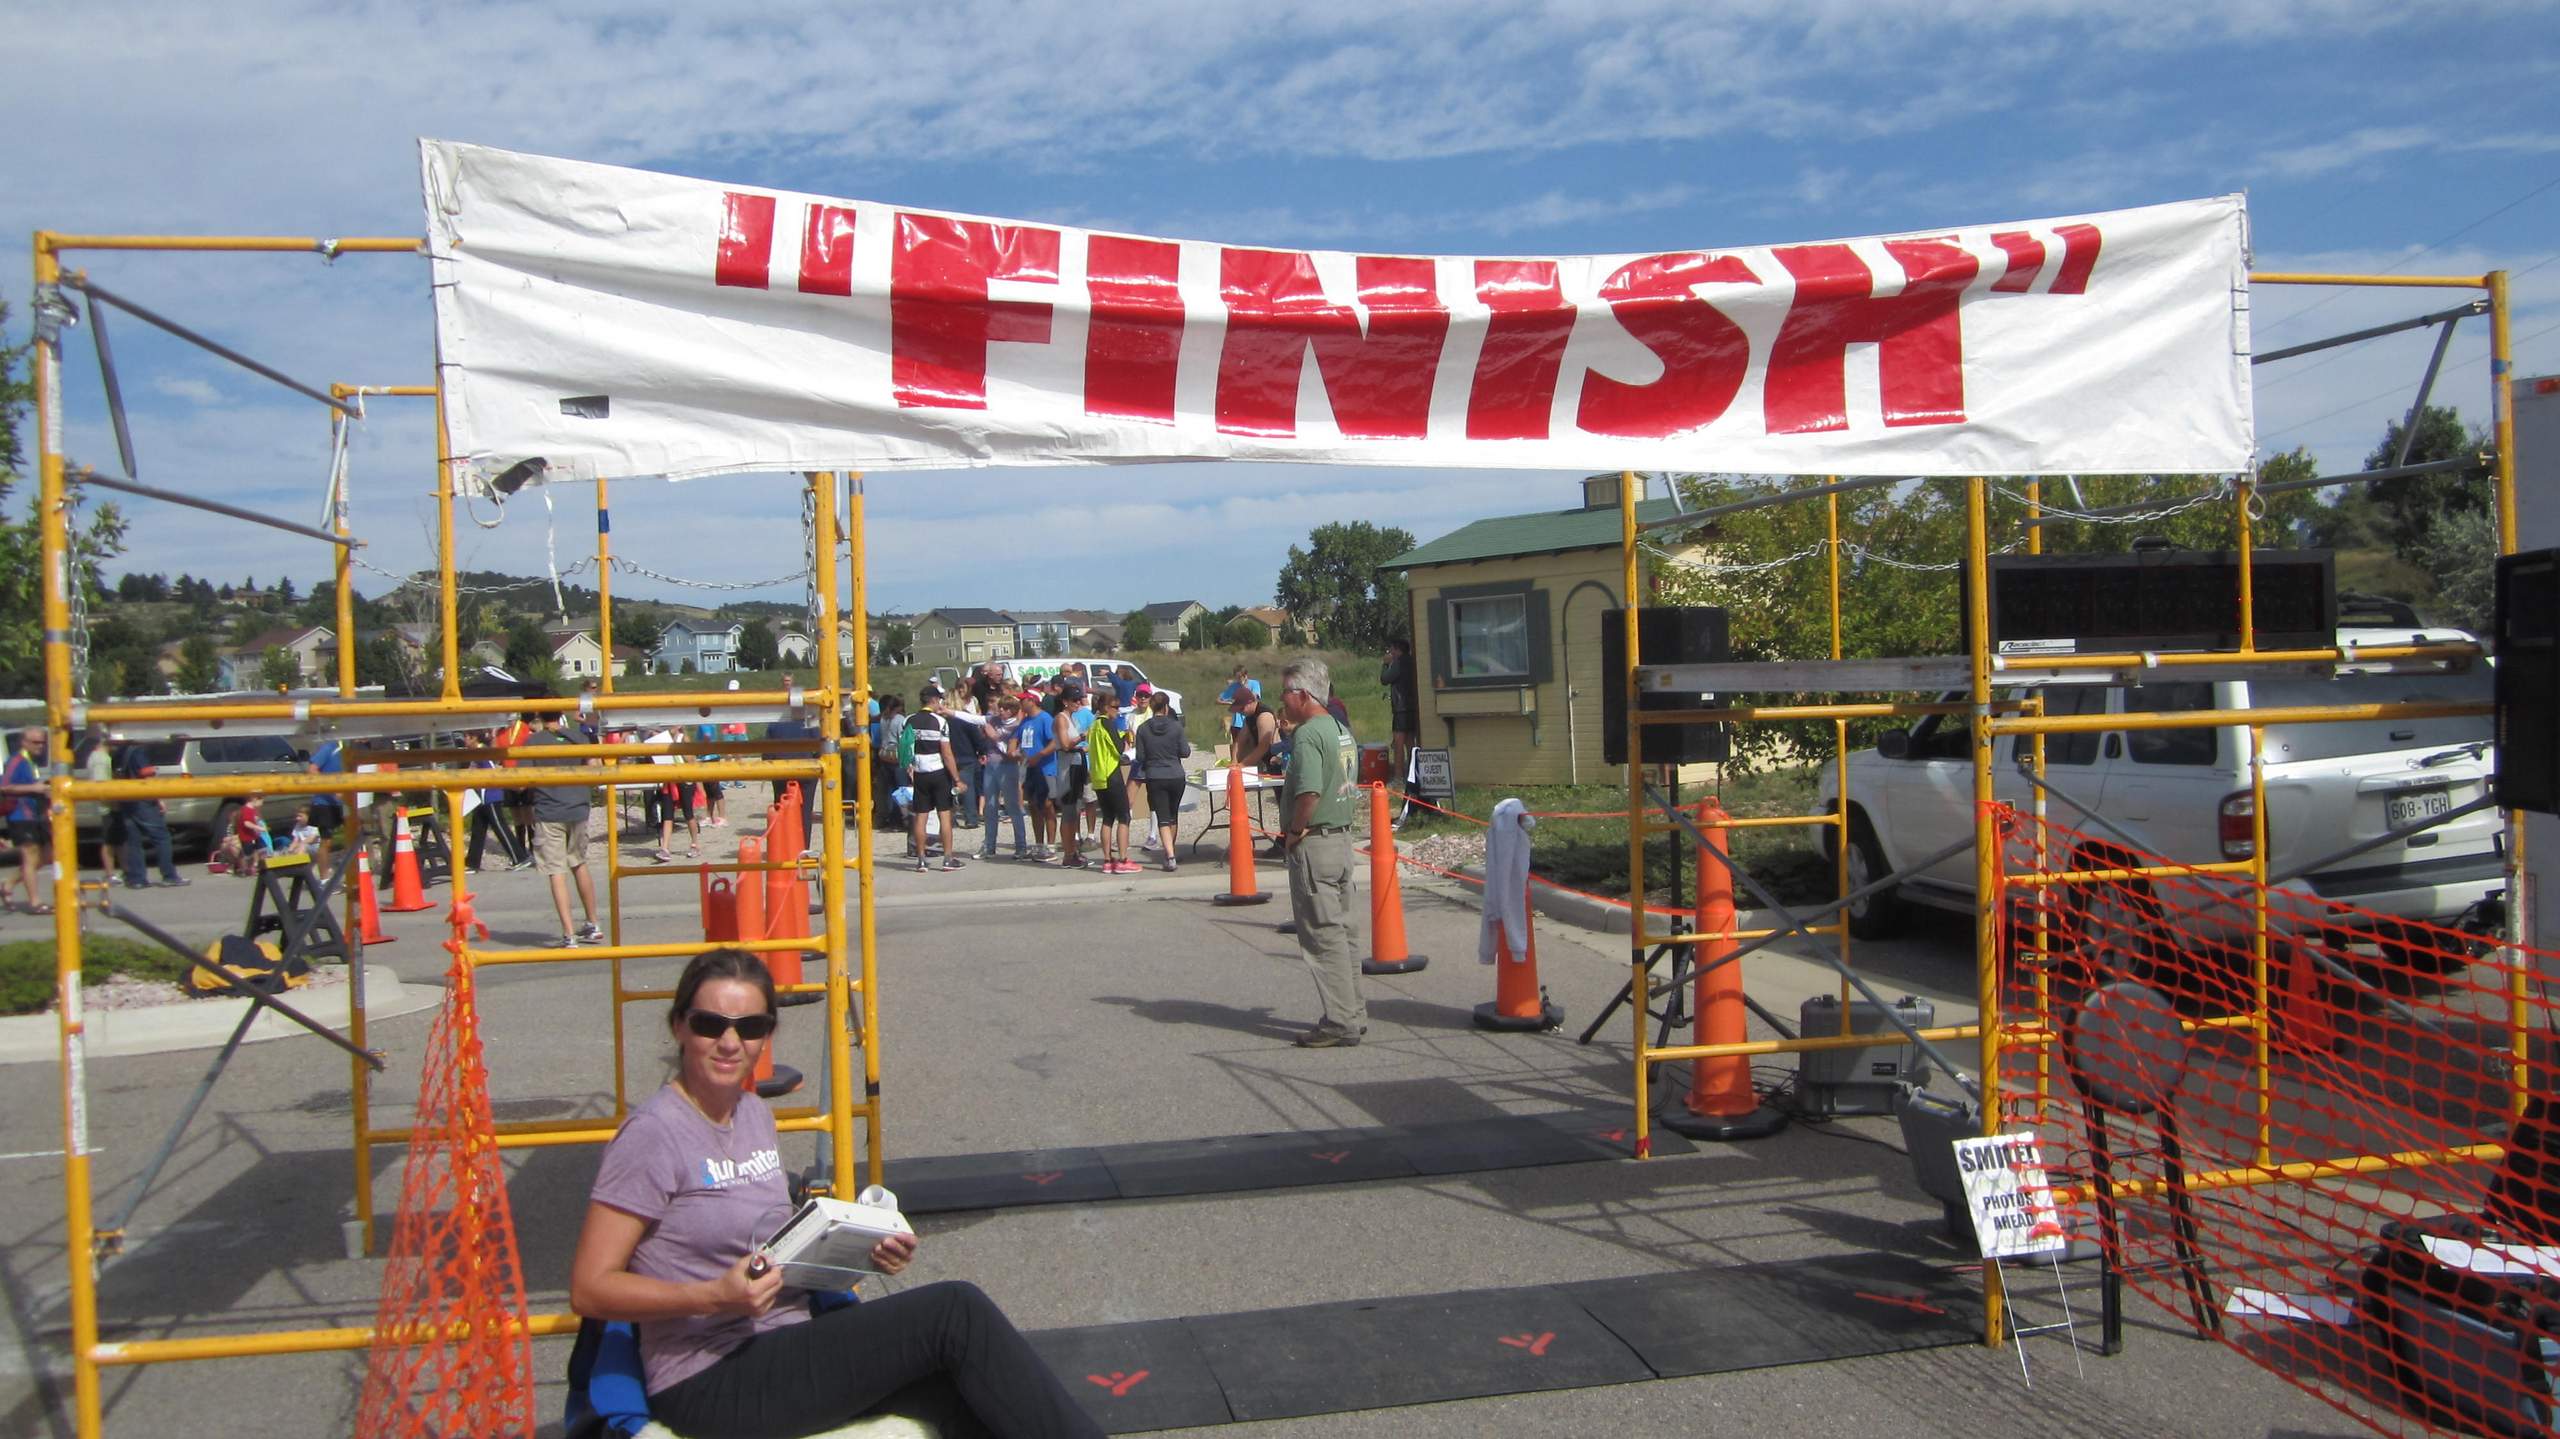 The finish line of the Fall Classic Marathon. The finish line is always a welcome sight.